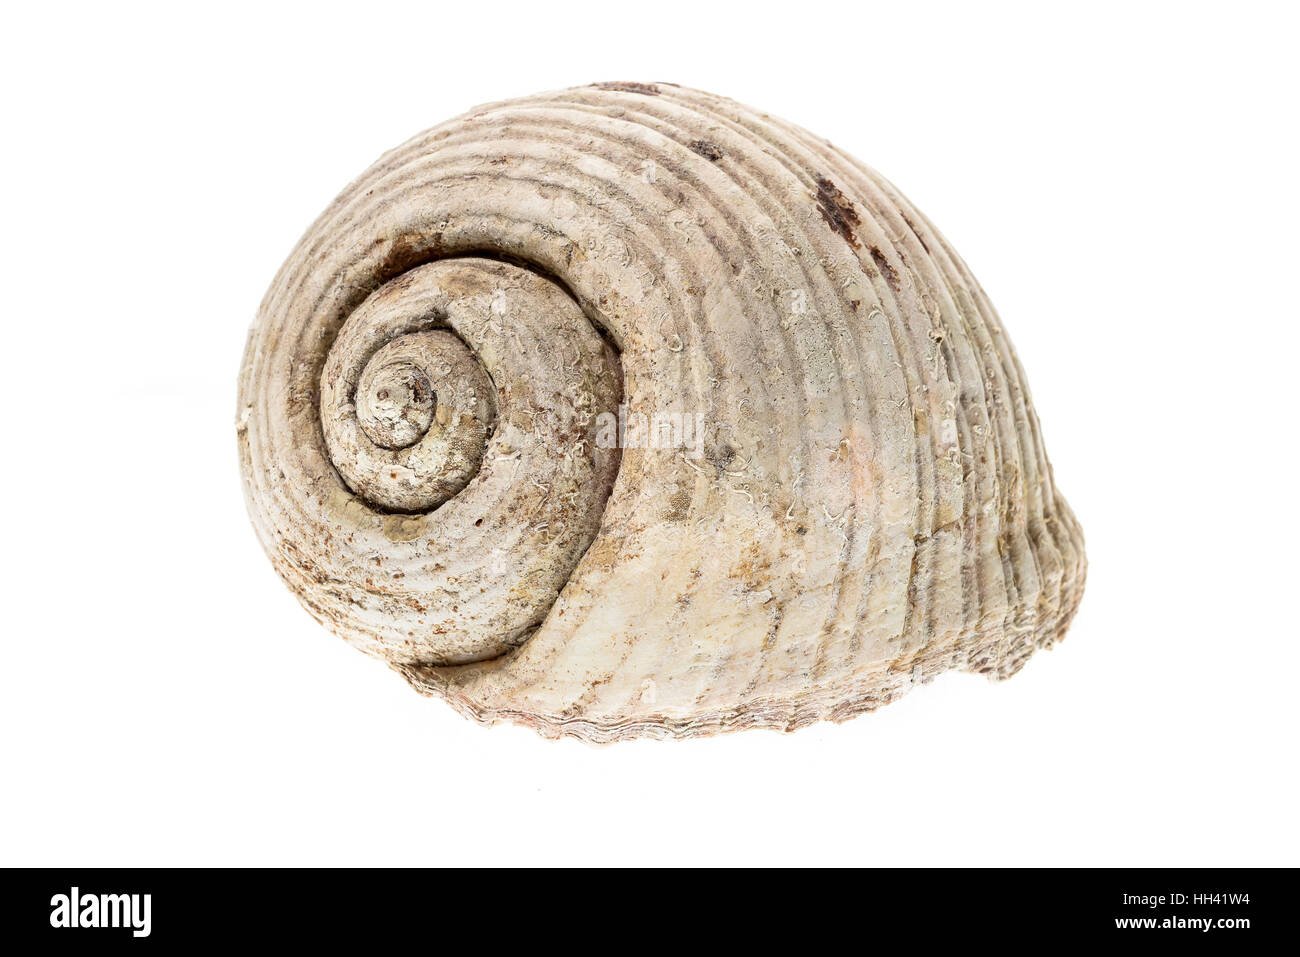 Helmet sea shell - Tonna Galea or Tun Shell. Empty house of a sea snail.  Sea shell with twisted canal from Adriatic or Mediterranean Sea - Croatia, G Stock Photo